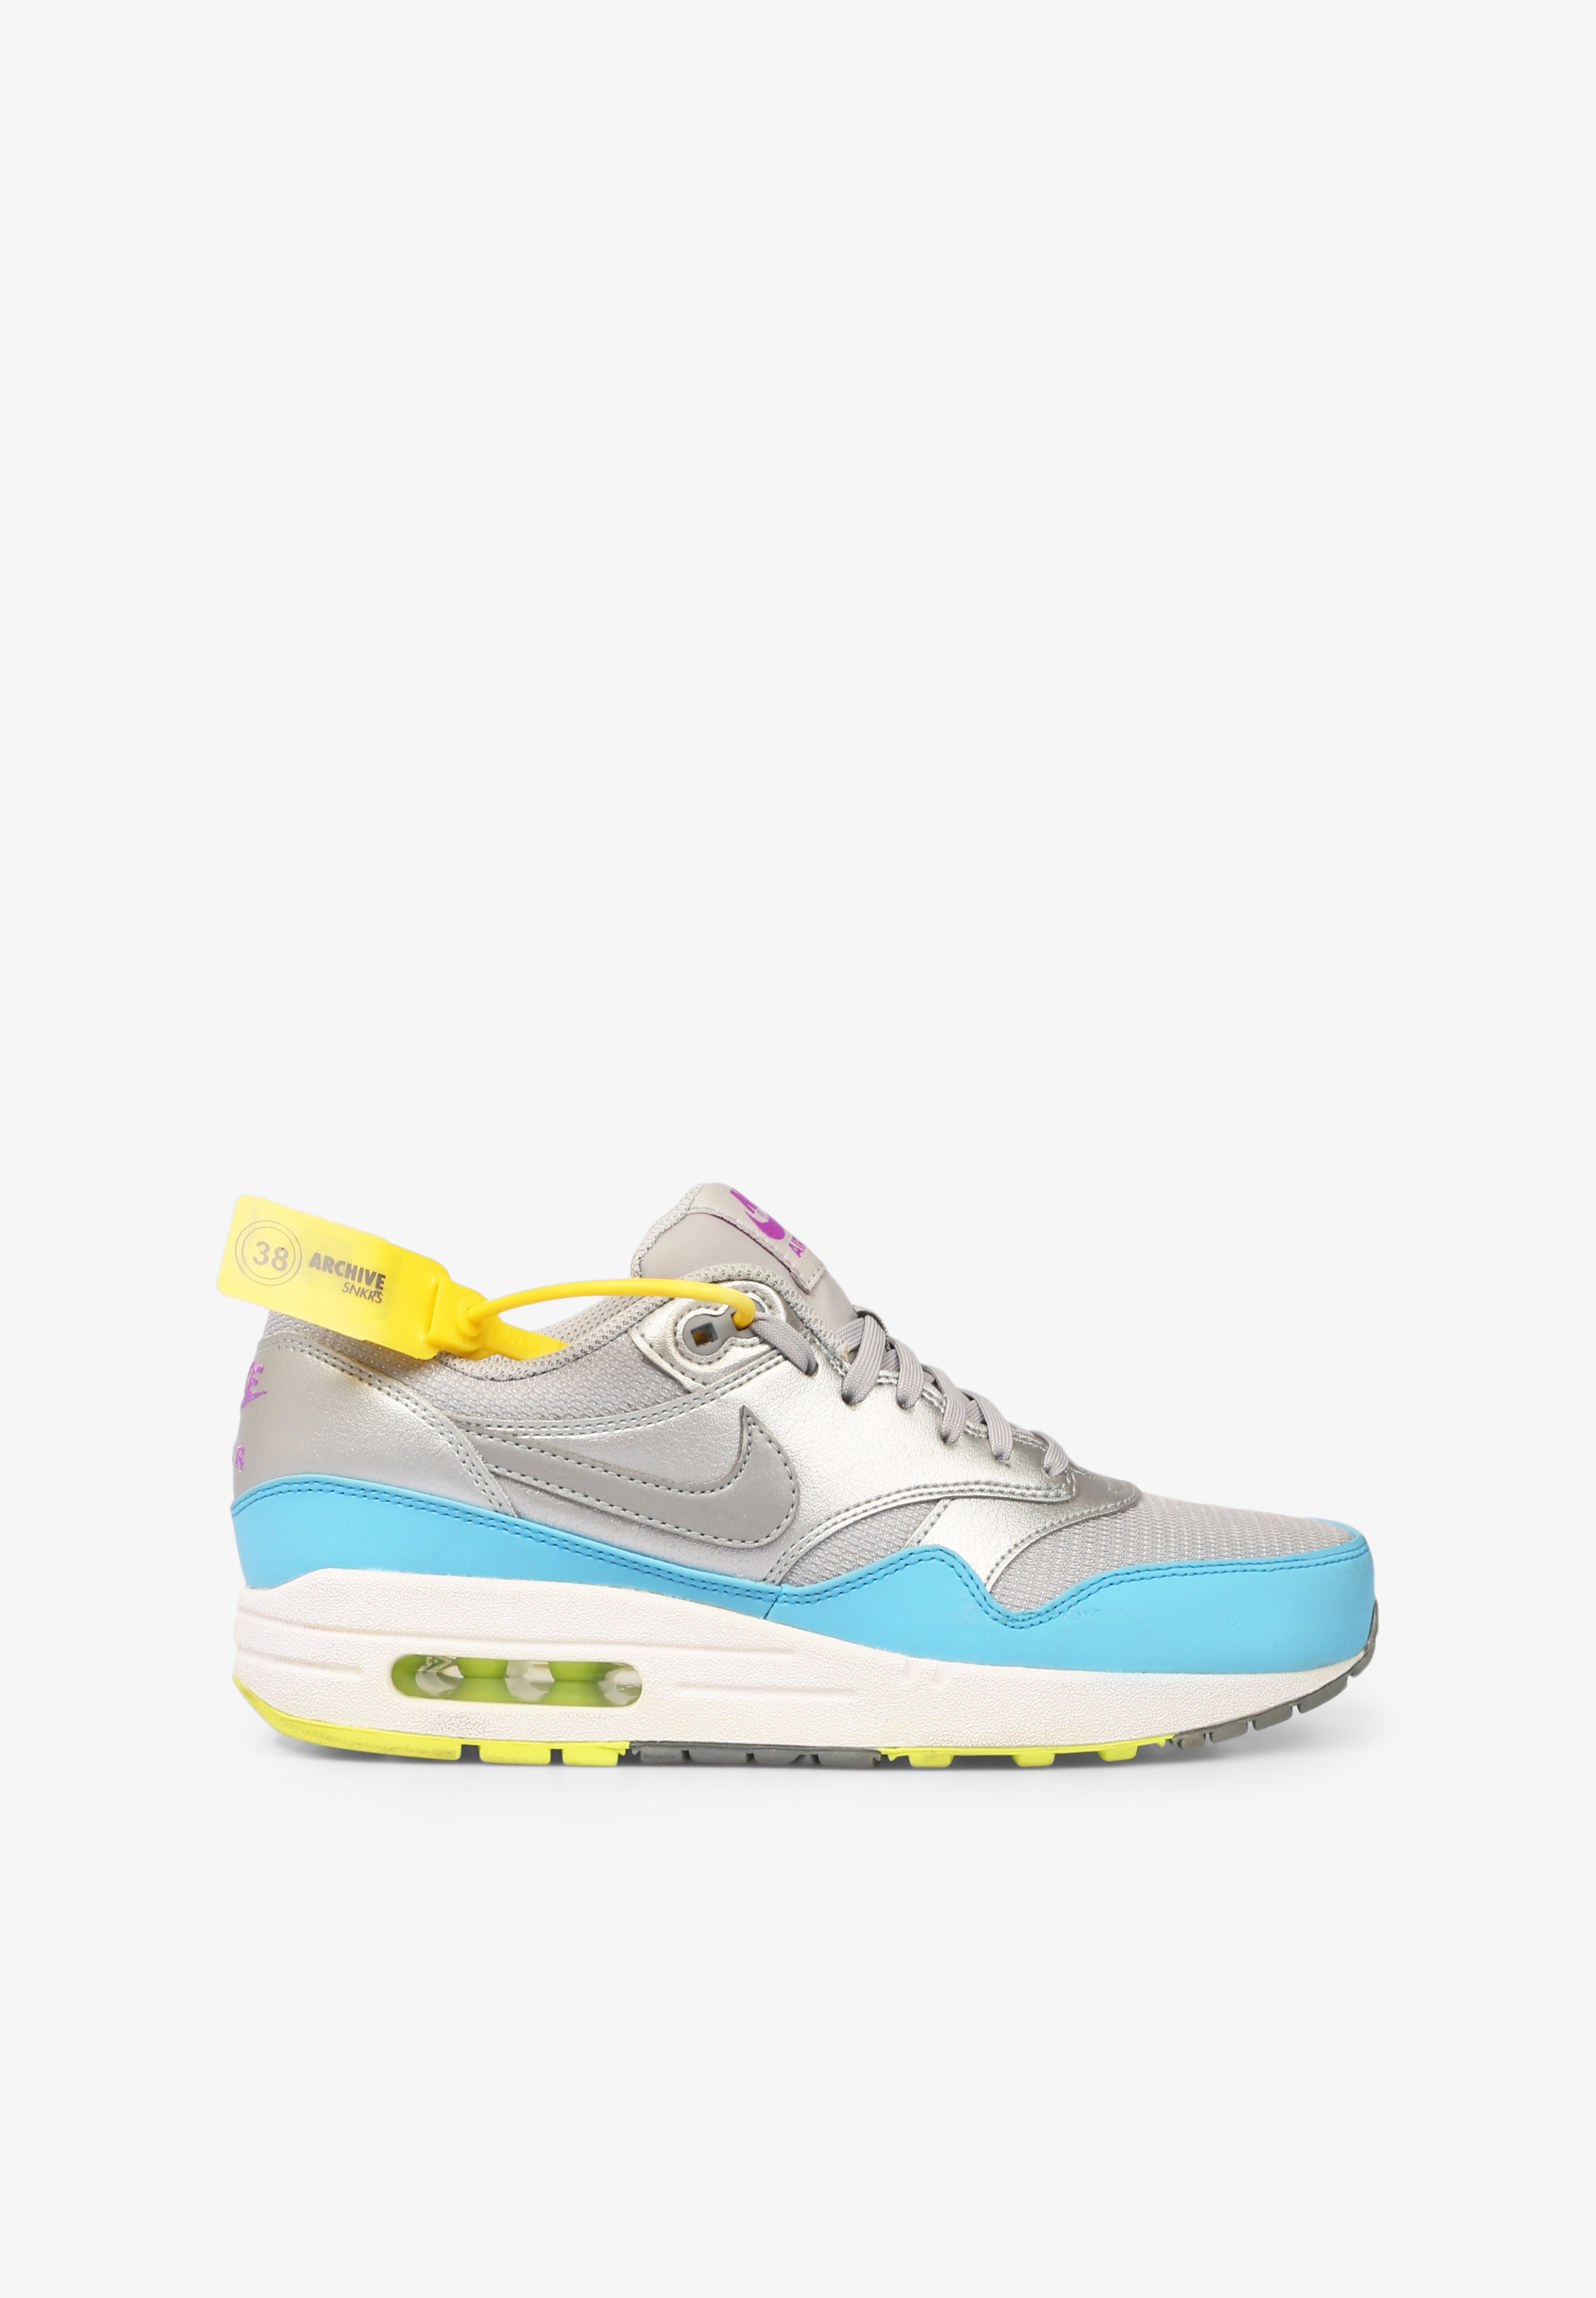 ARCHIVE SNEAKRS | SNEAKERS NIKE AIR MAX 1 FB TALLA 38.5